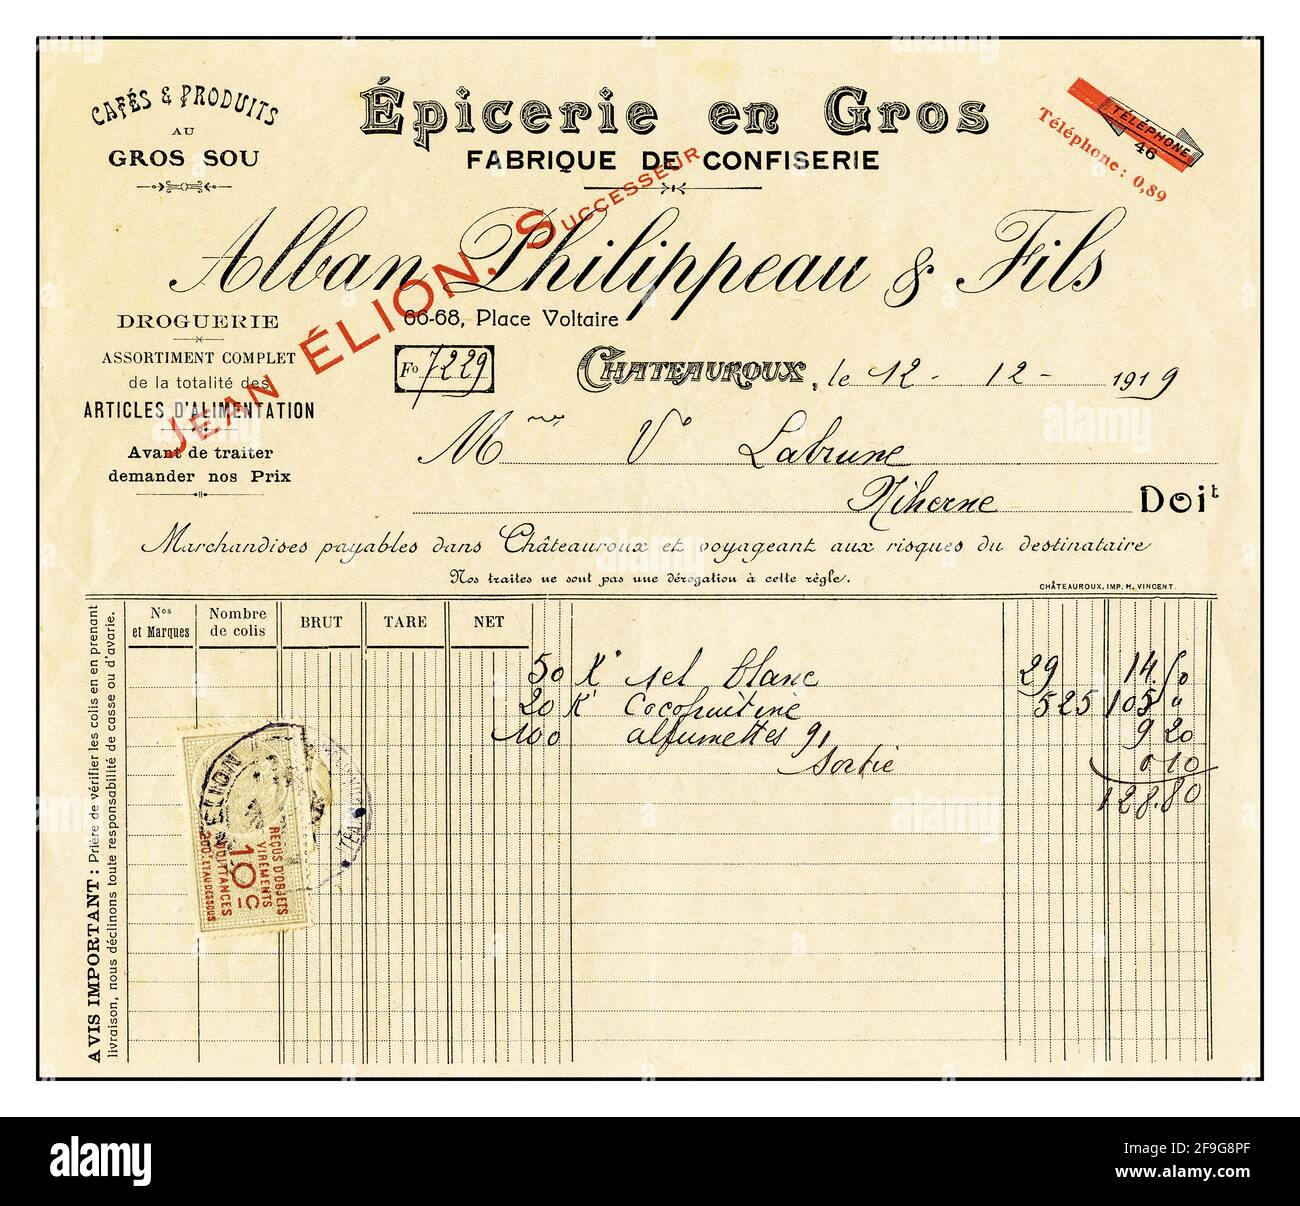 Vintage old 1900's EPICERIE EN GROS handwritten receipt for wholesale groceries French receipt. dated December 12, 1919. CHATEAUROUX Indre France Stock Photo